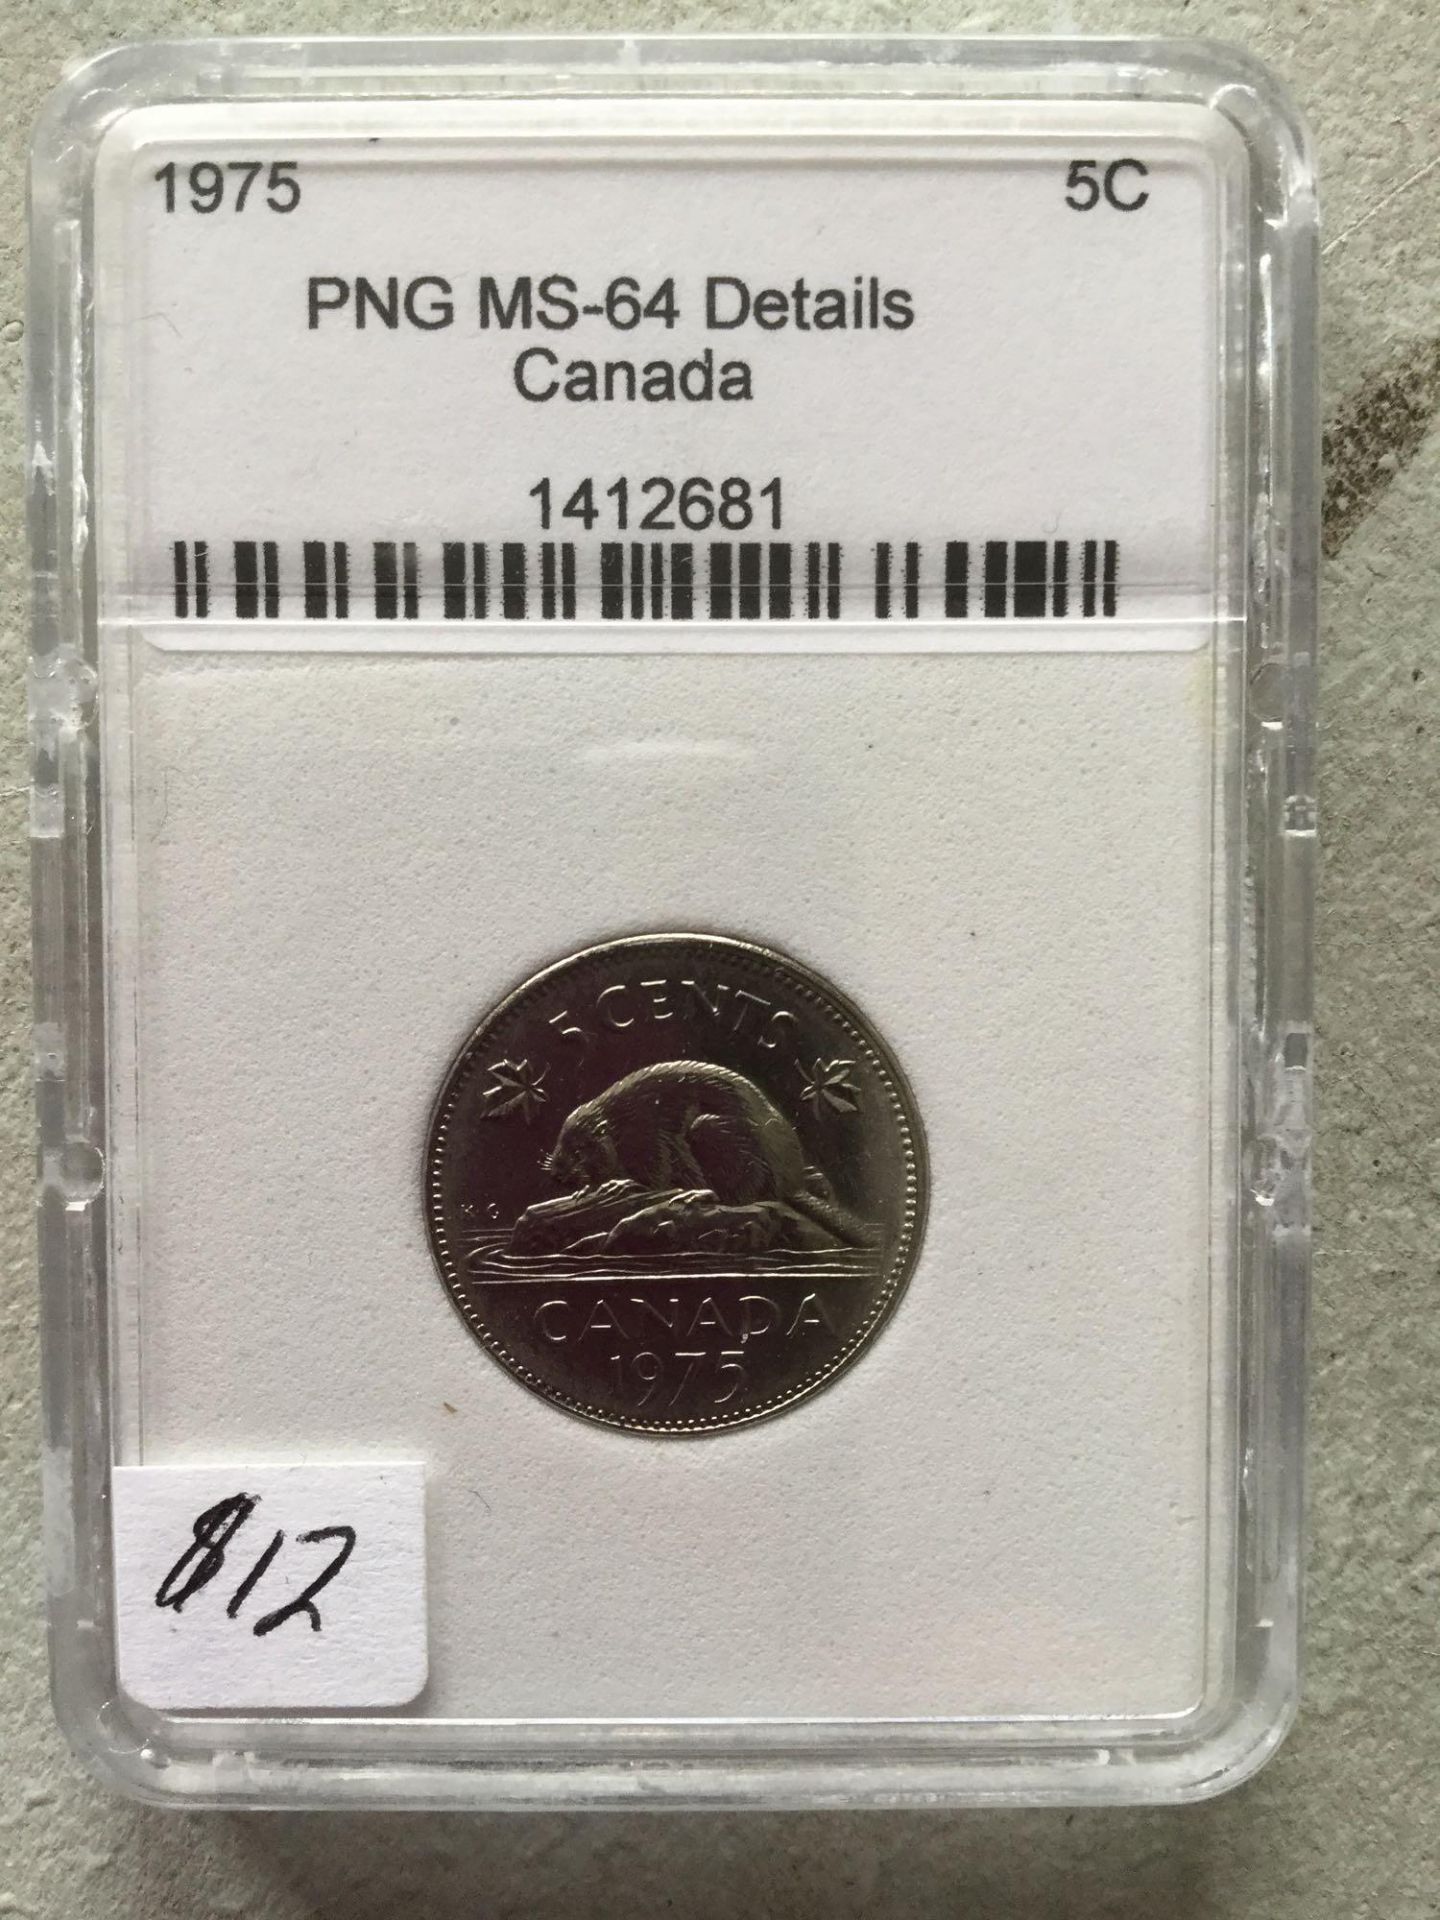 1975- Royal Canadian Mint 5 cent Coin - PNG MS-64 details Canada